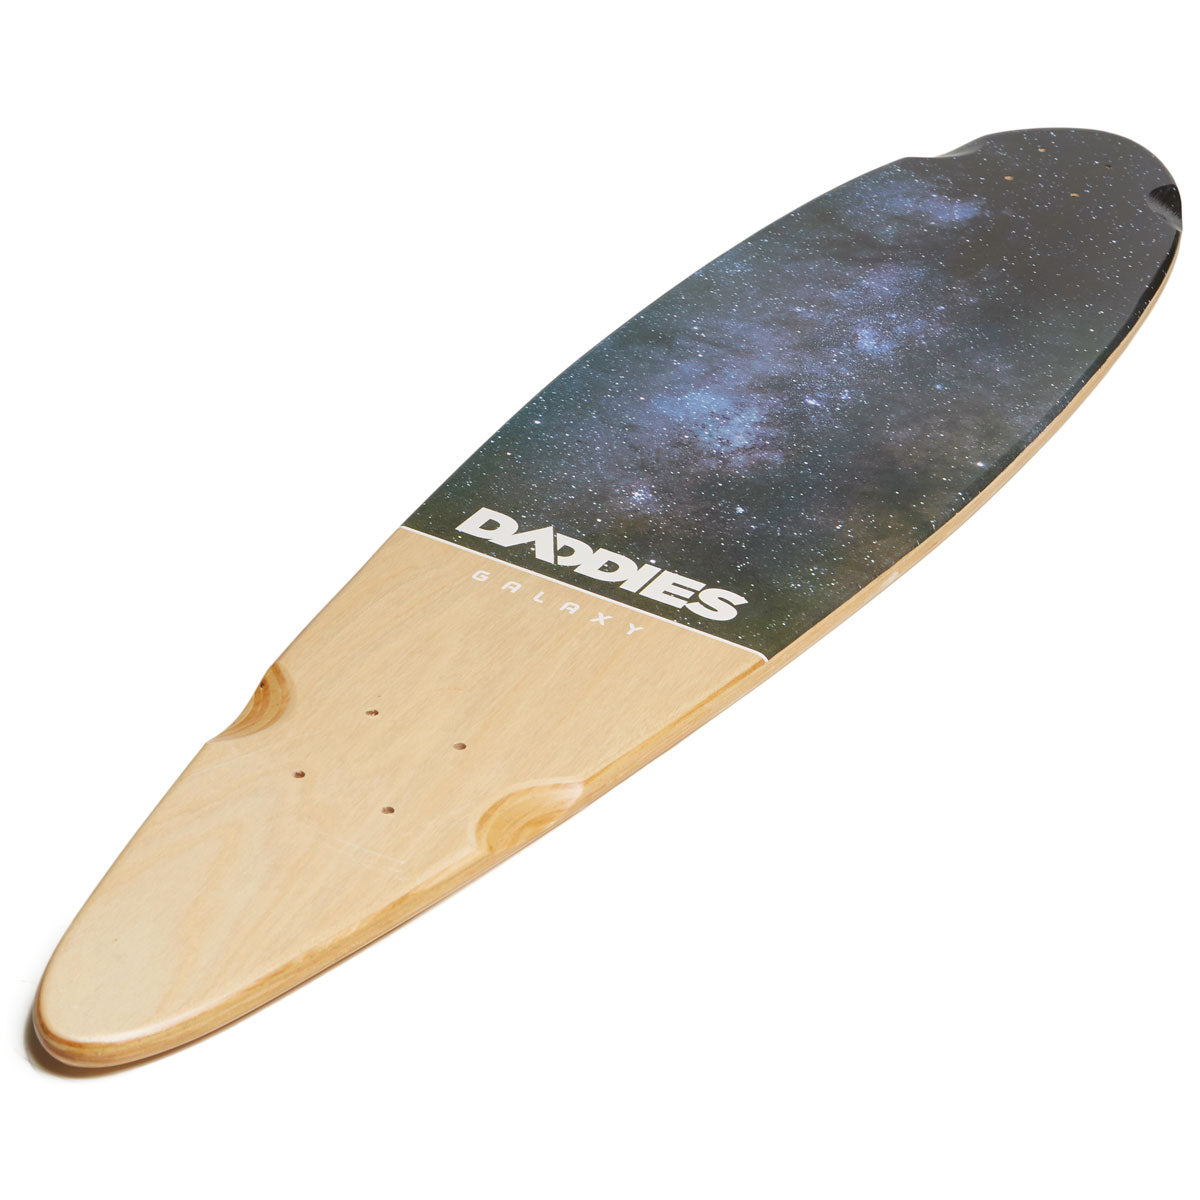 Daddies Galaxy Pintail Longboard Complete image 4